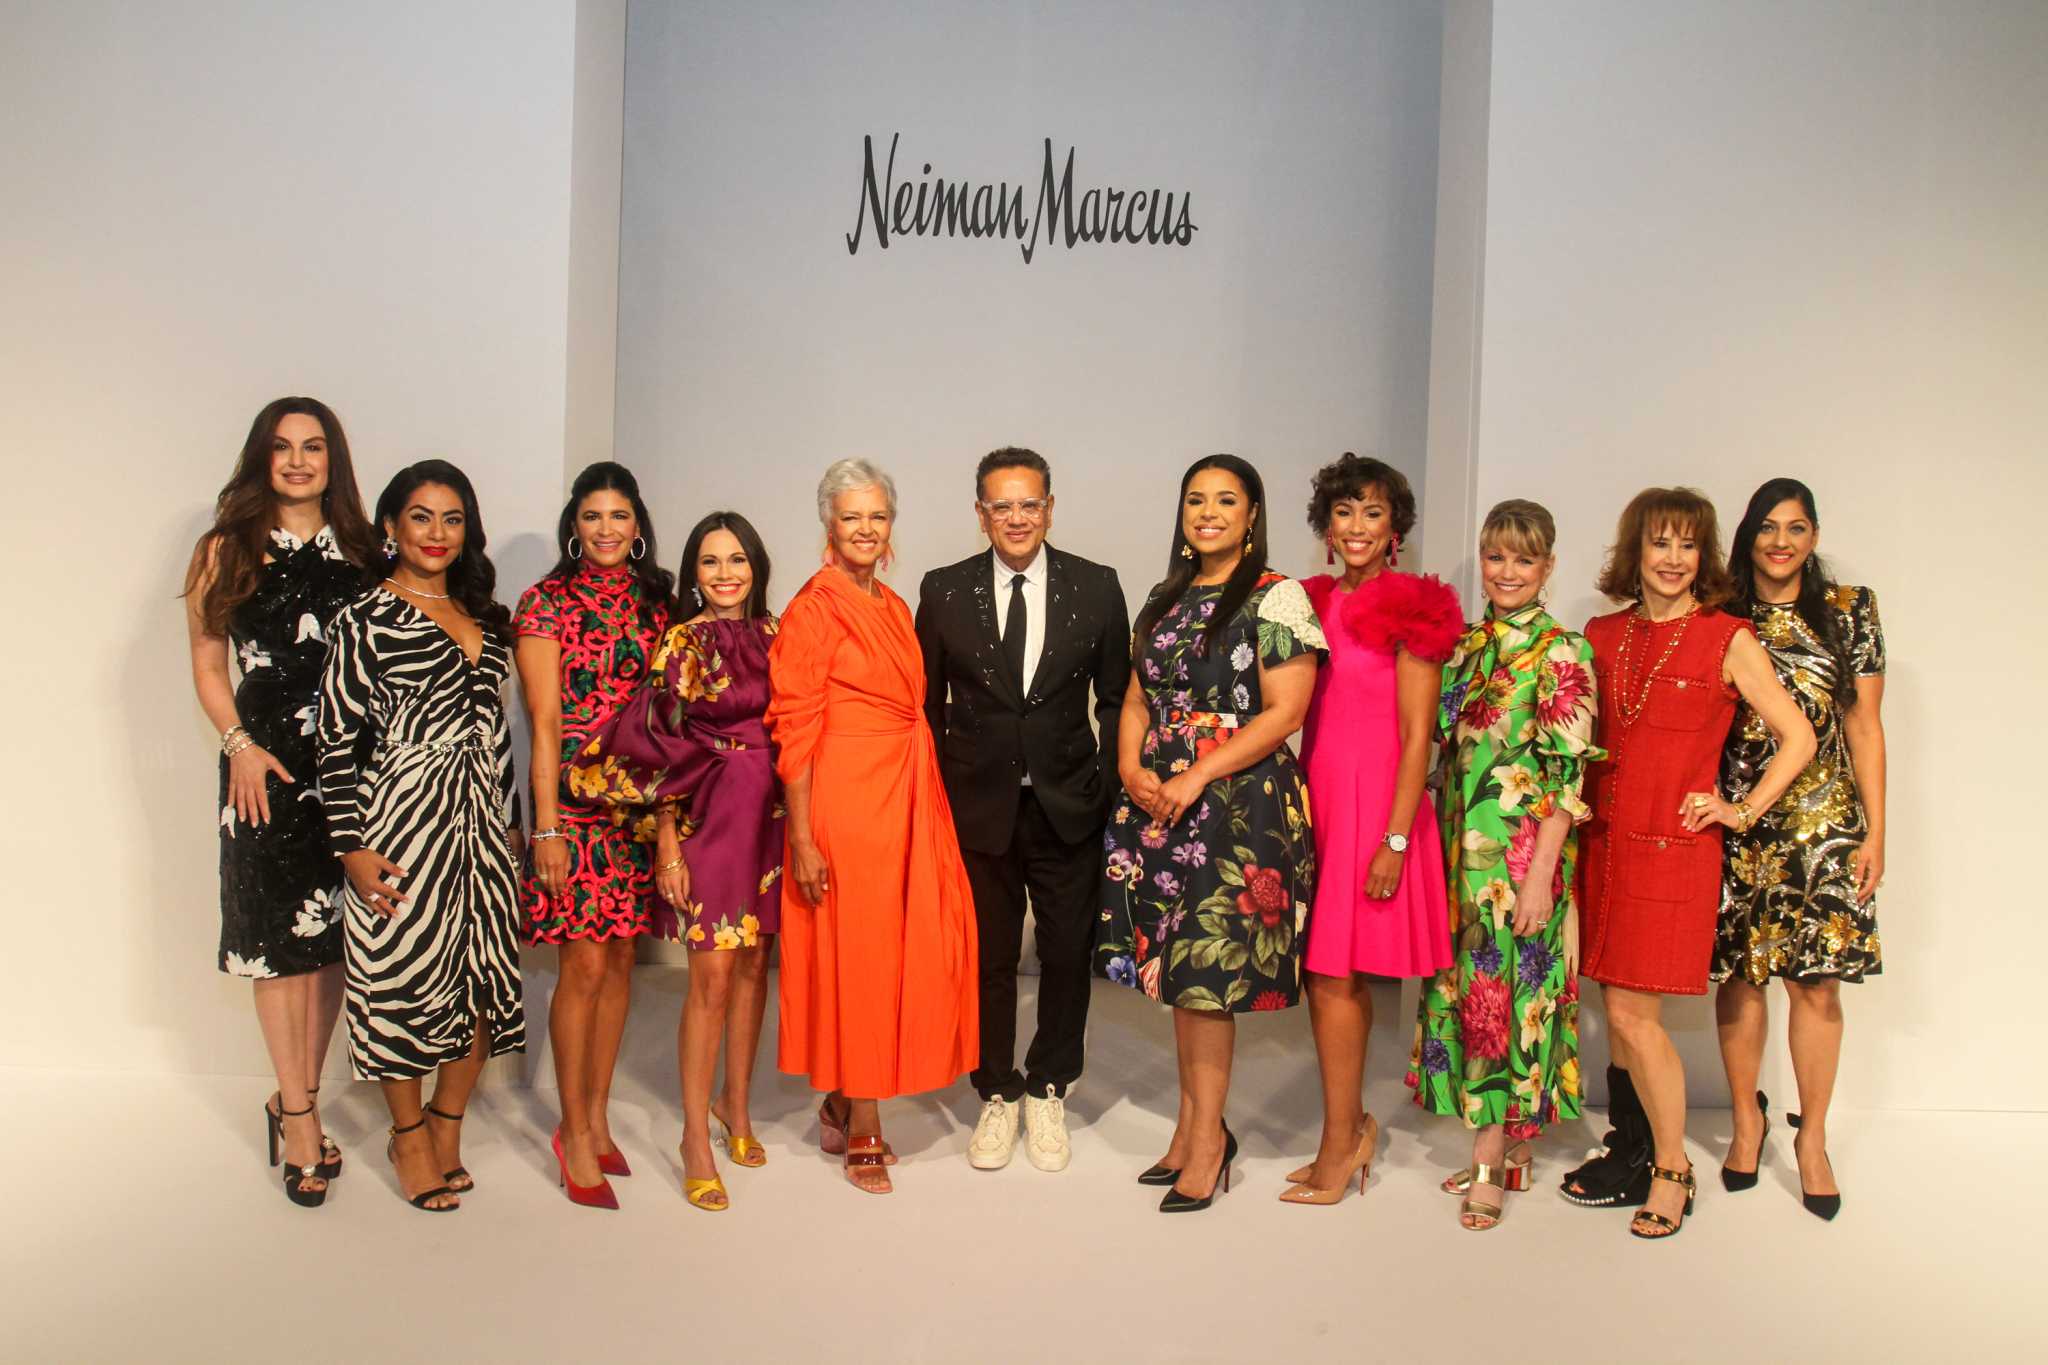 em>PaperCity</em> Best Dressed Honorees Revealed at Buzzing Neiman